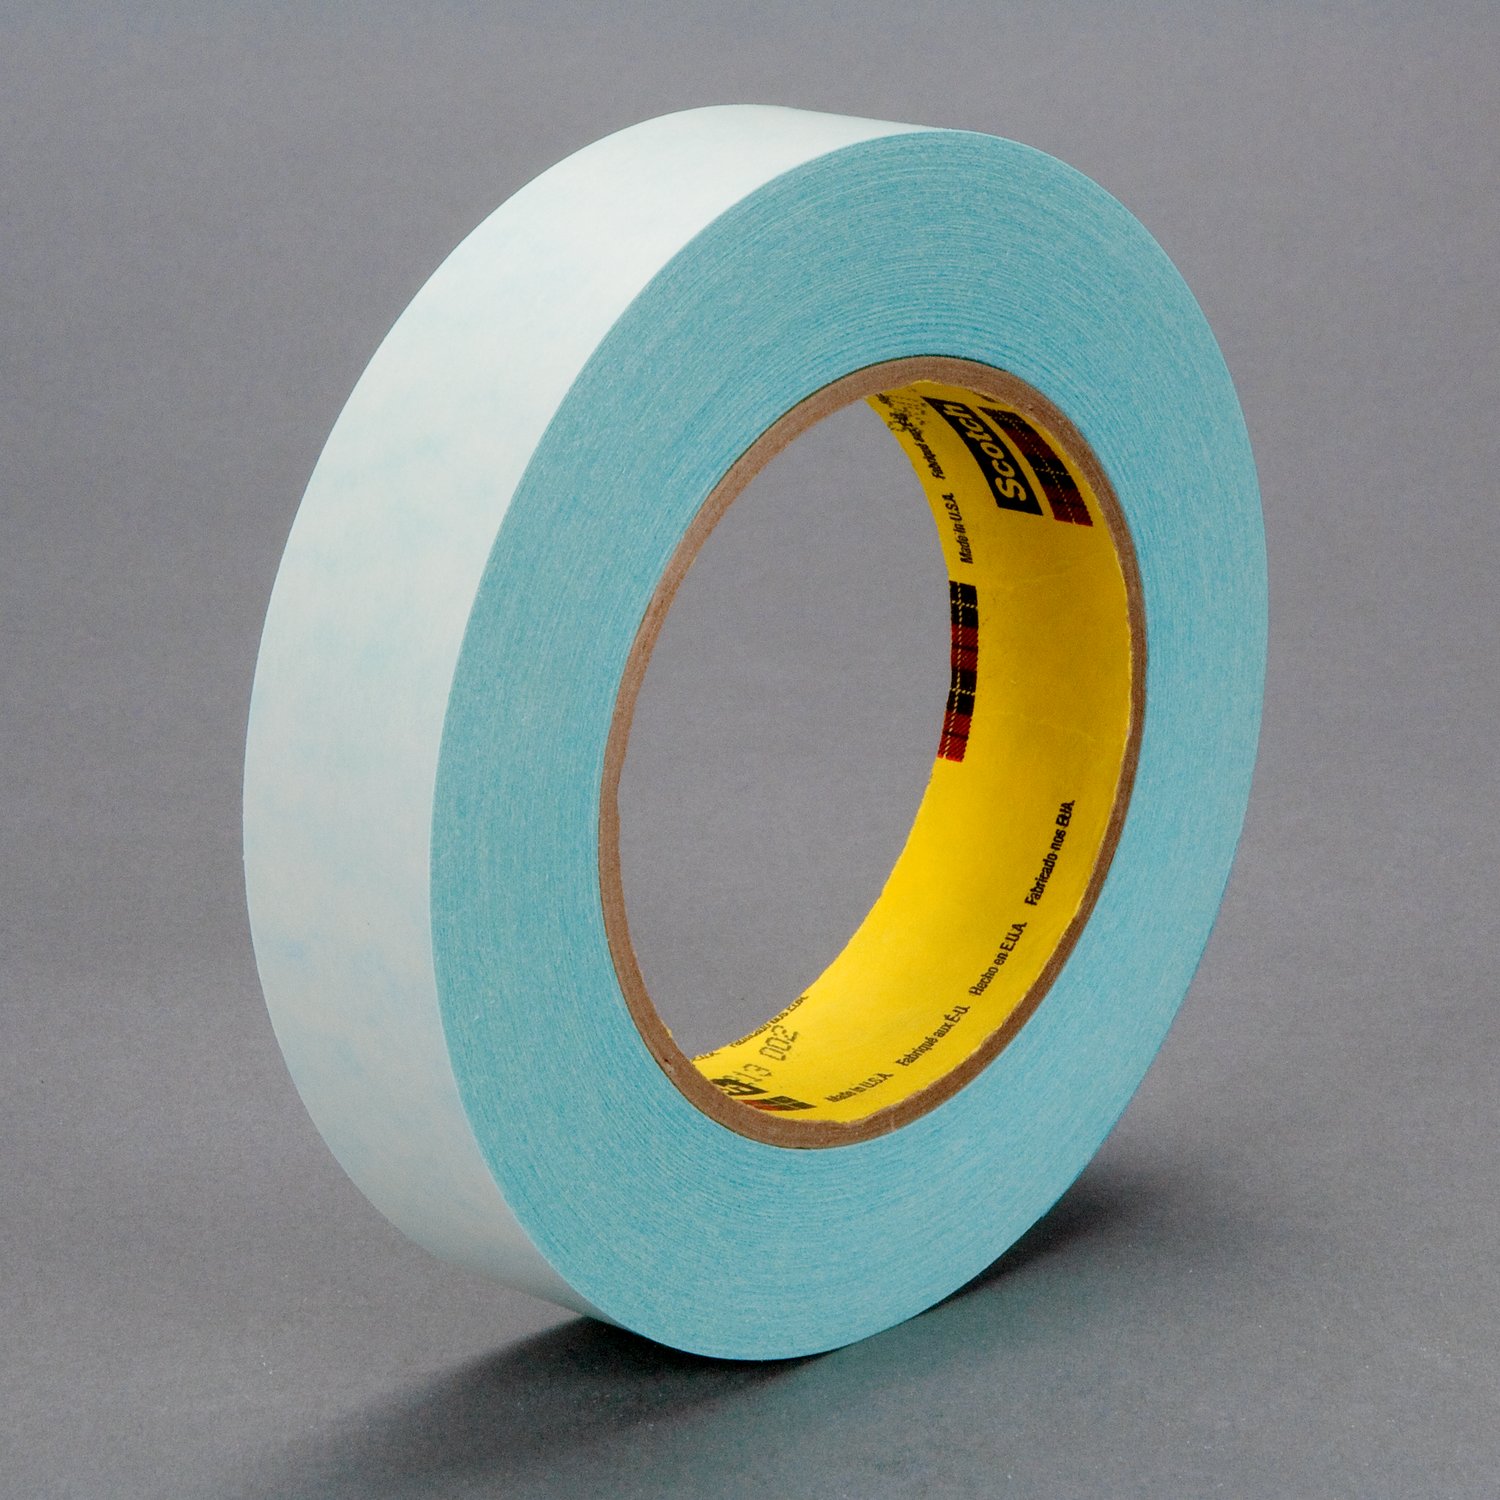 7100087683 - 3M Repulpable Single Coated Splicing Tape 9960, Blue, 2.5 mil, Roll,
Config, Custom Lengths